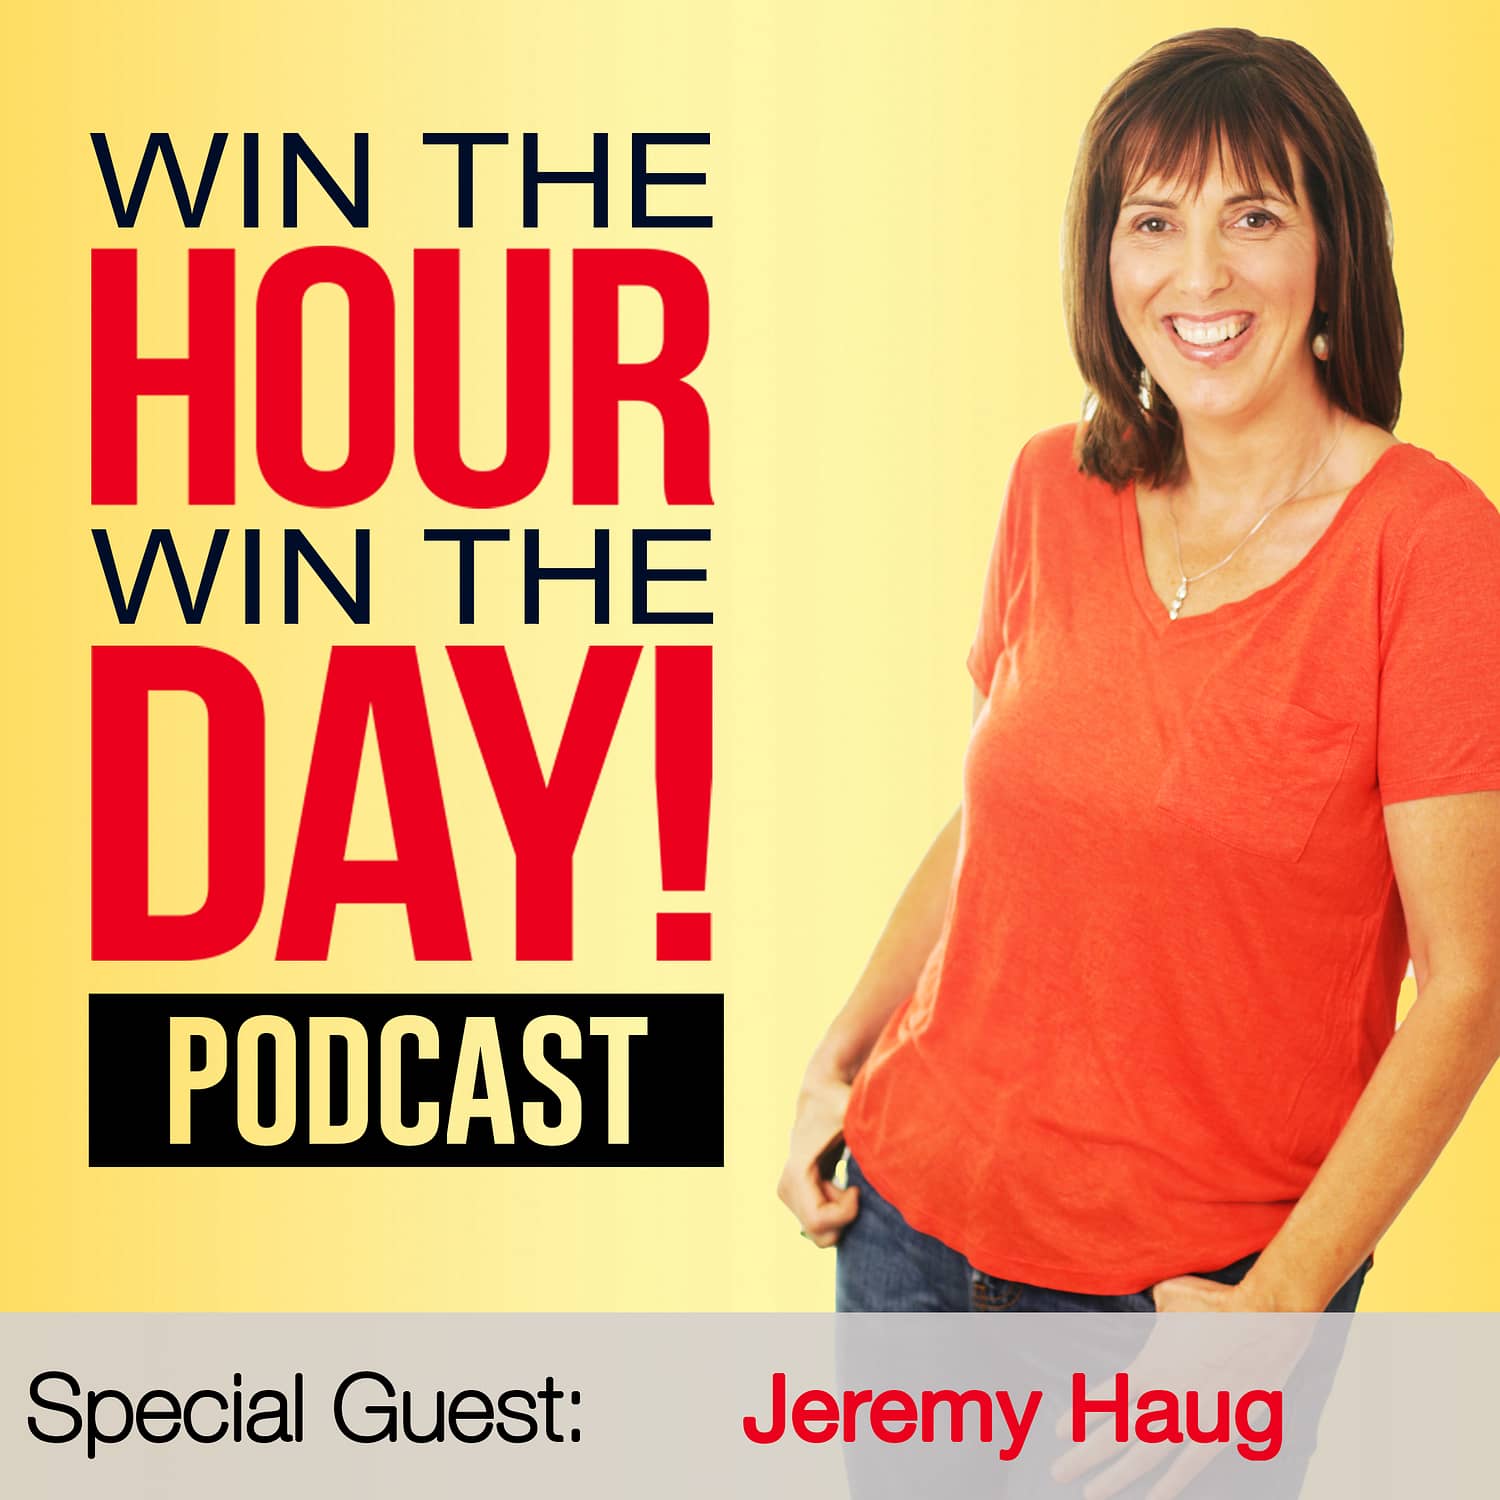 Follow Up Sales Strategies To Grow Your Business! with Jeremy Haug